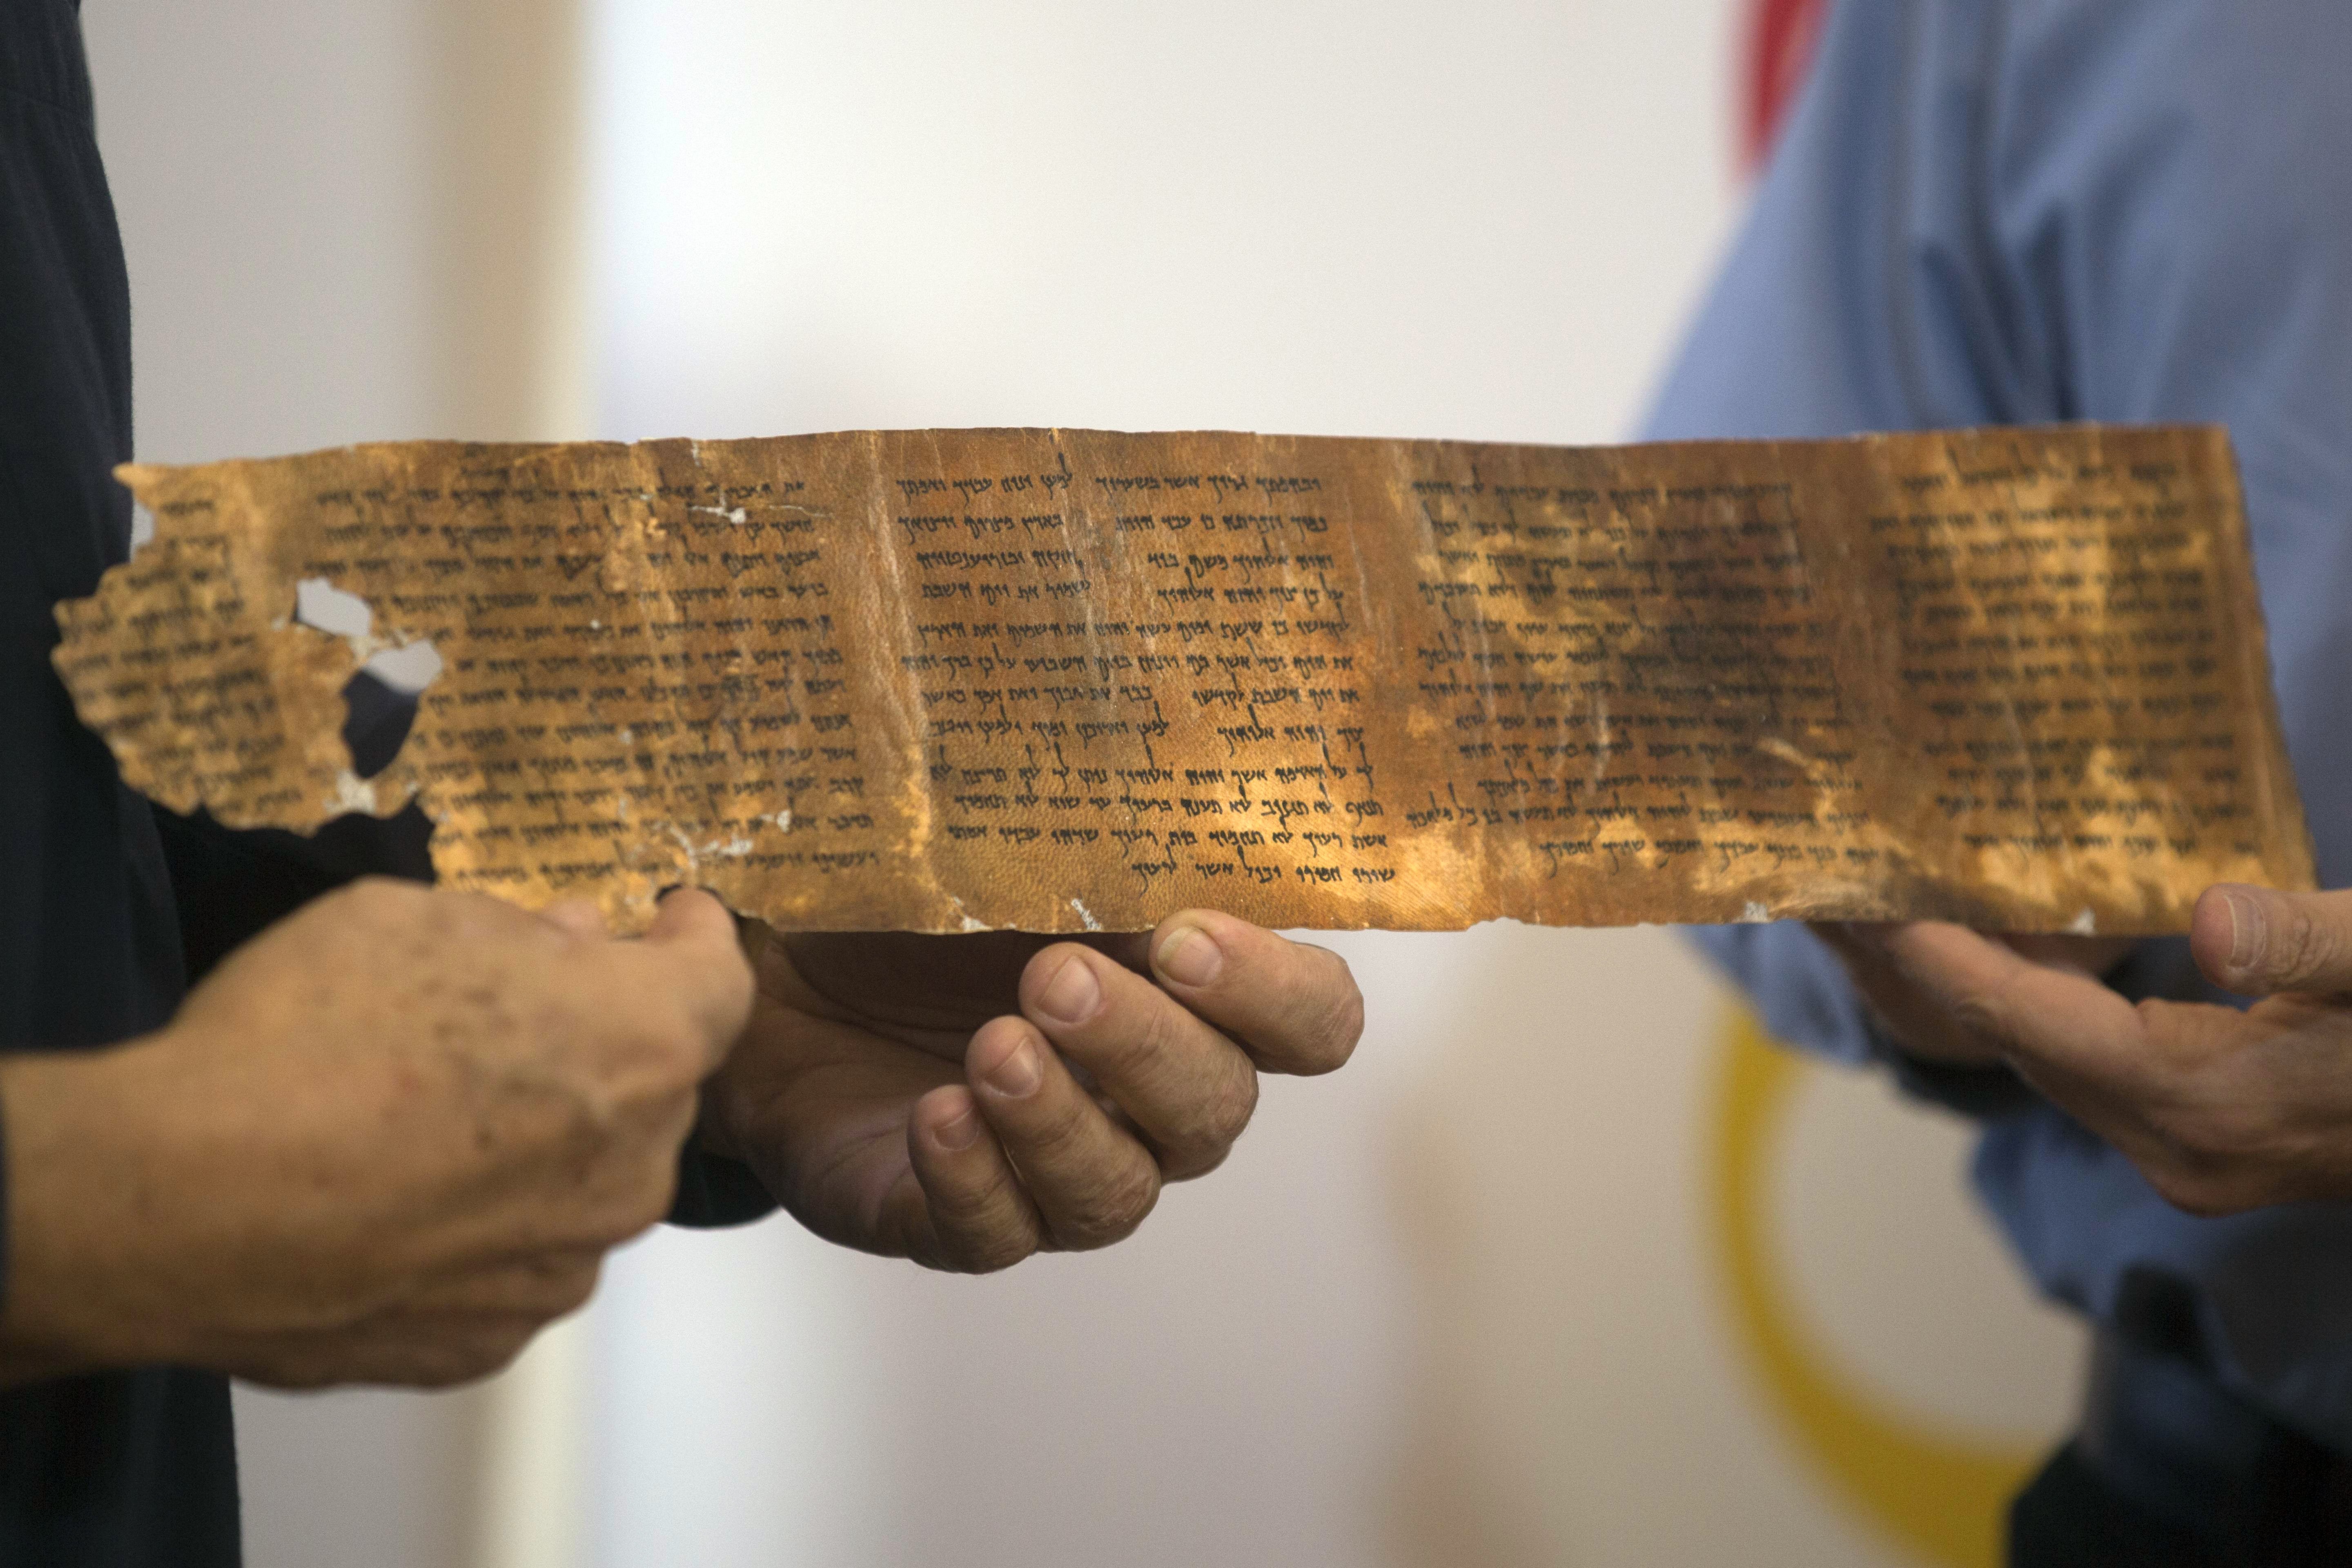 21st-century technology could reveal the secrets of the Dead Sea Scrolls